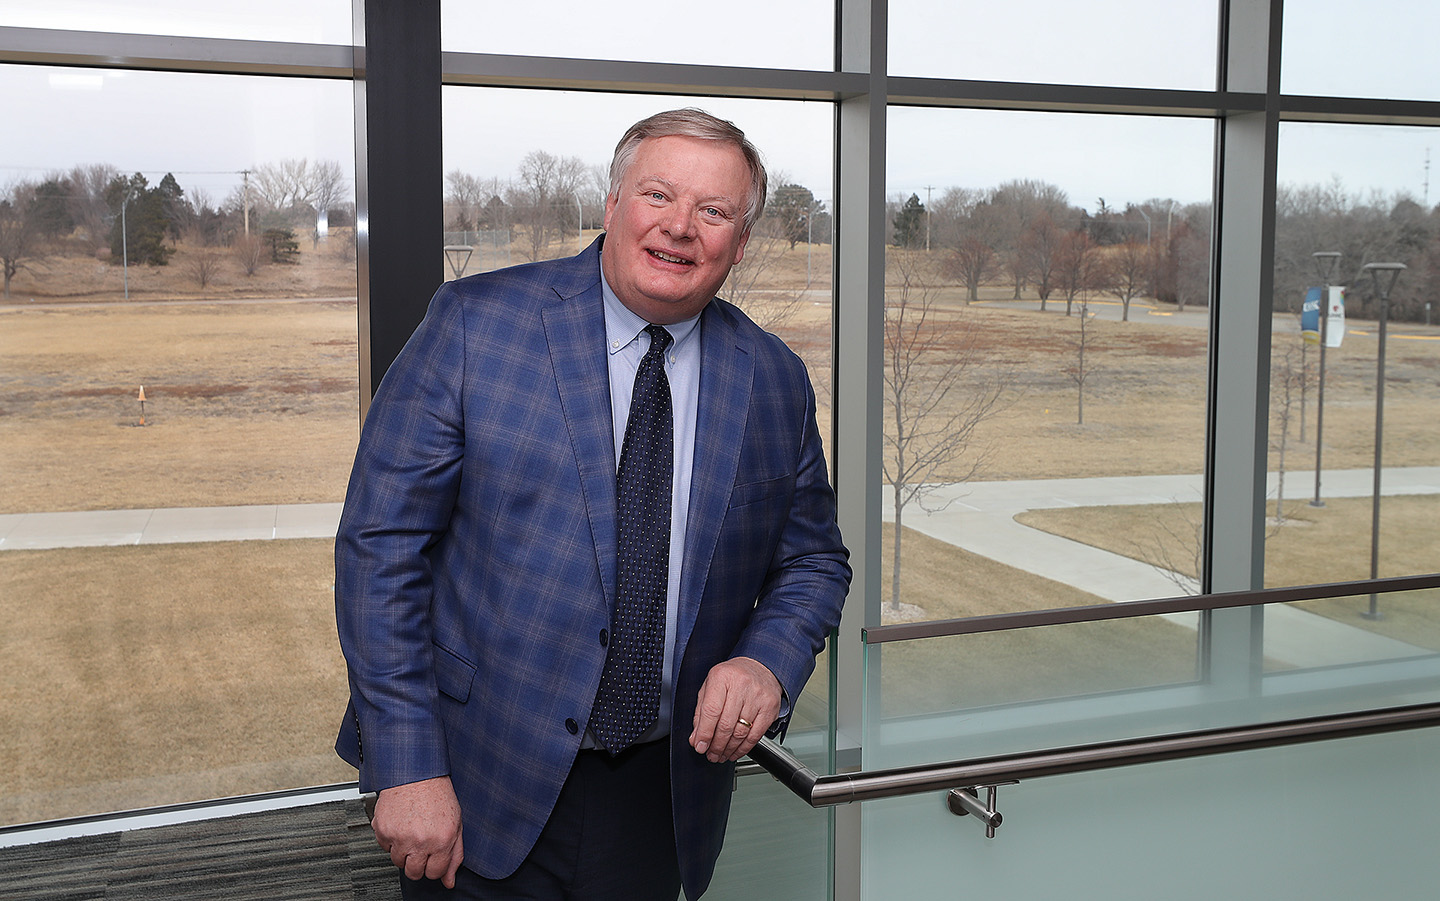 UNK Chancellor Doug Kristensen championed the development of the Health Science Education Complex, which opened in 2015, and the new Rural Health Education Building scheduled to open in early 2026.